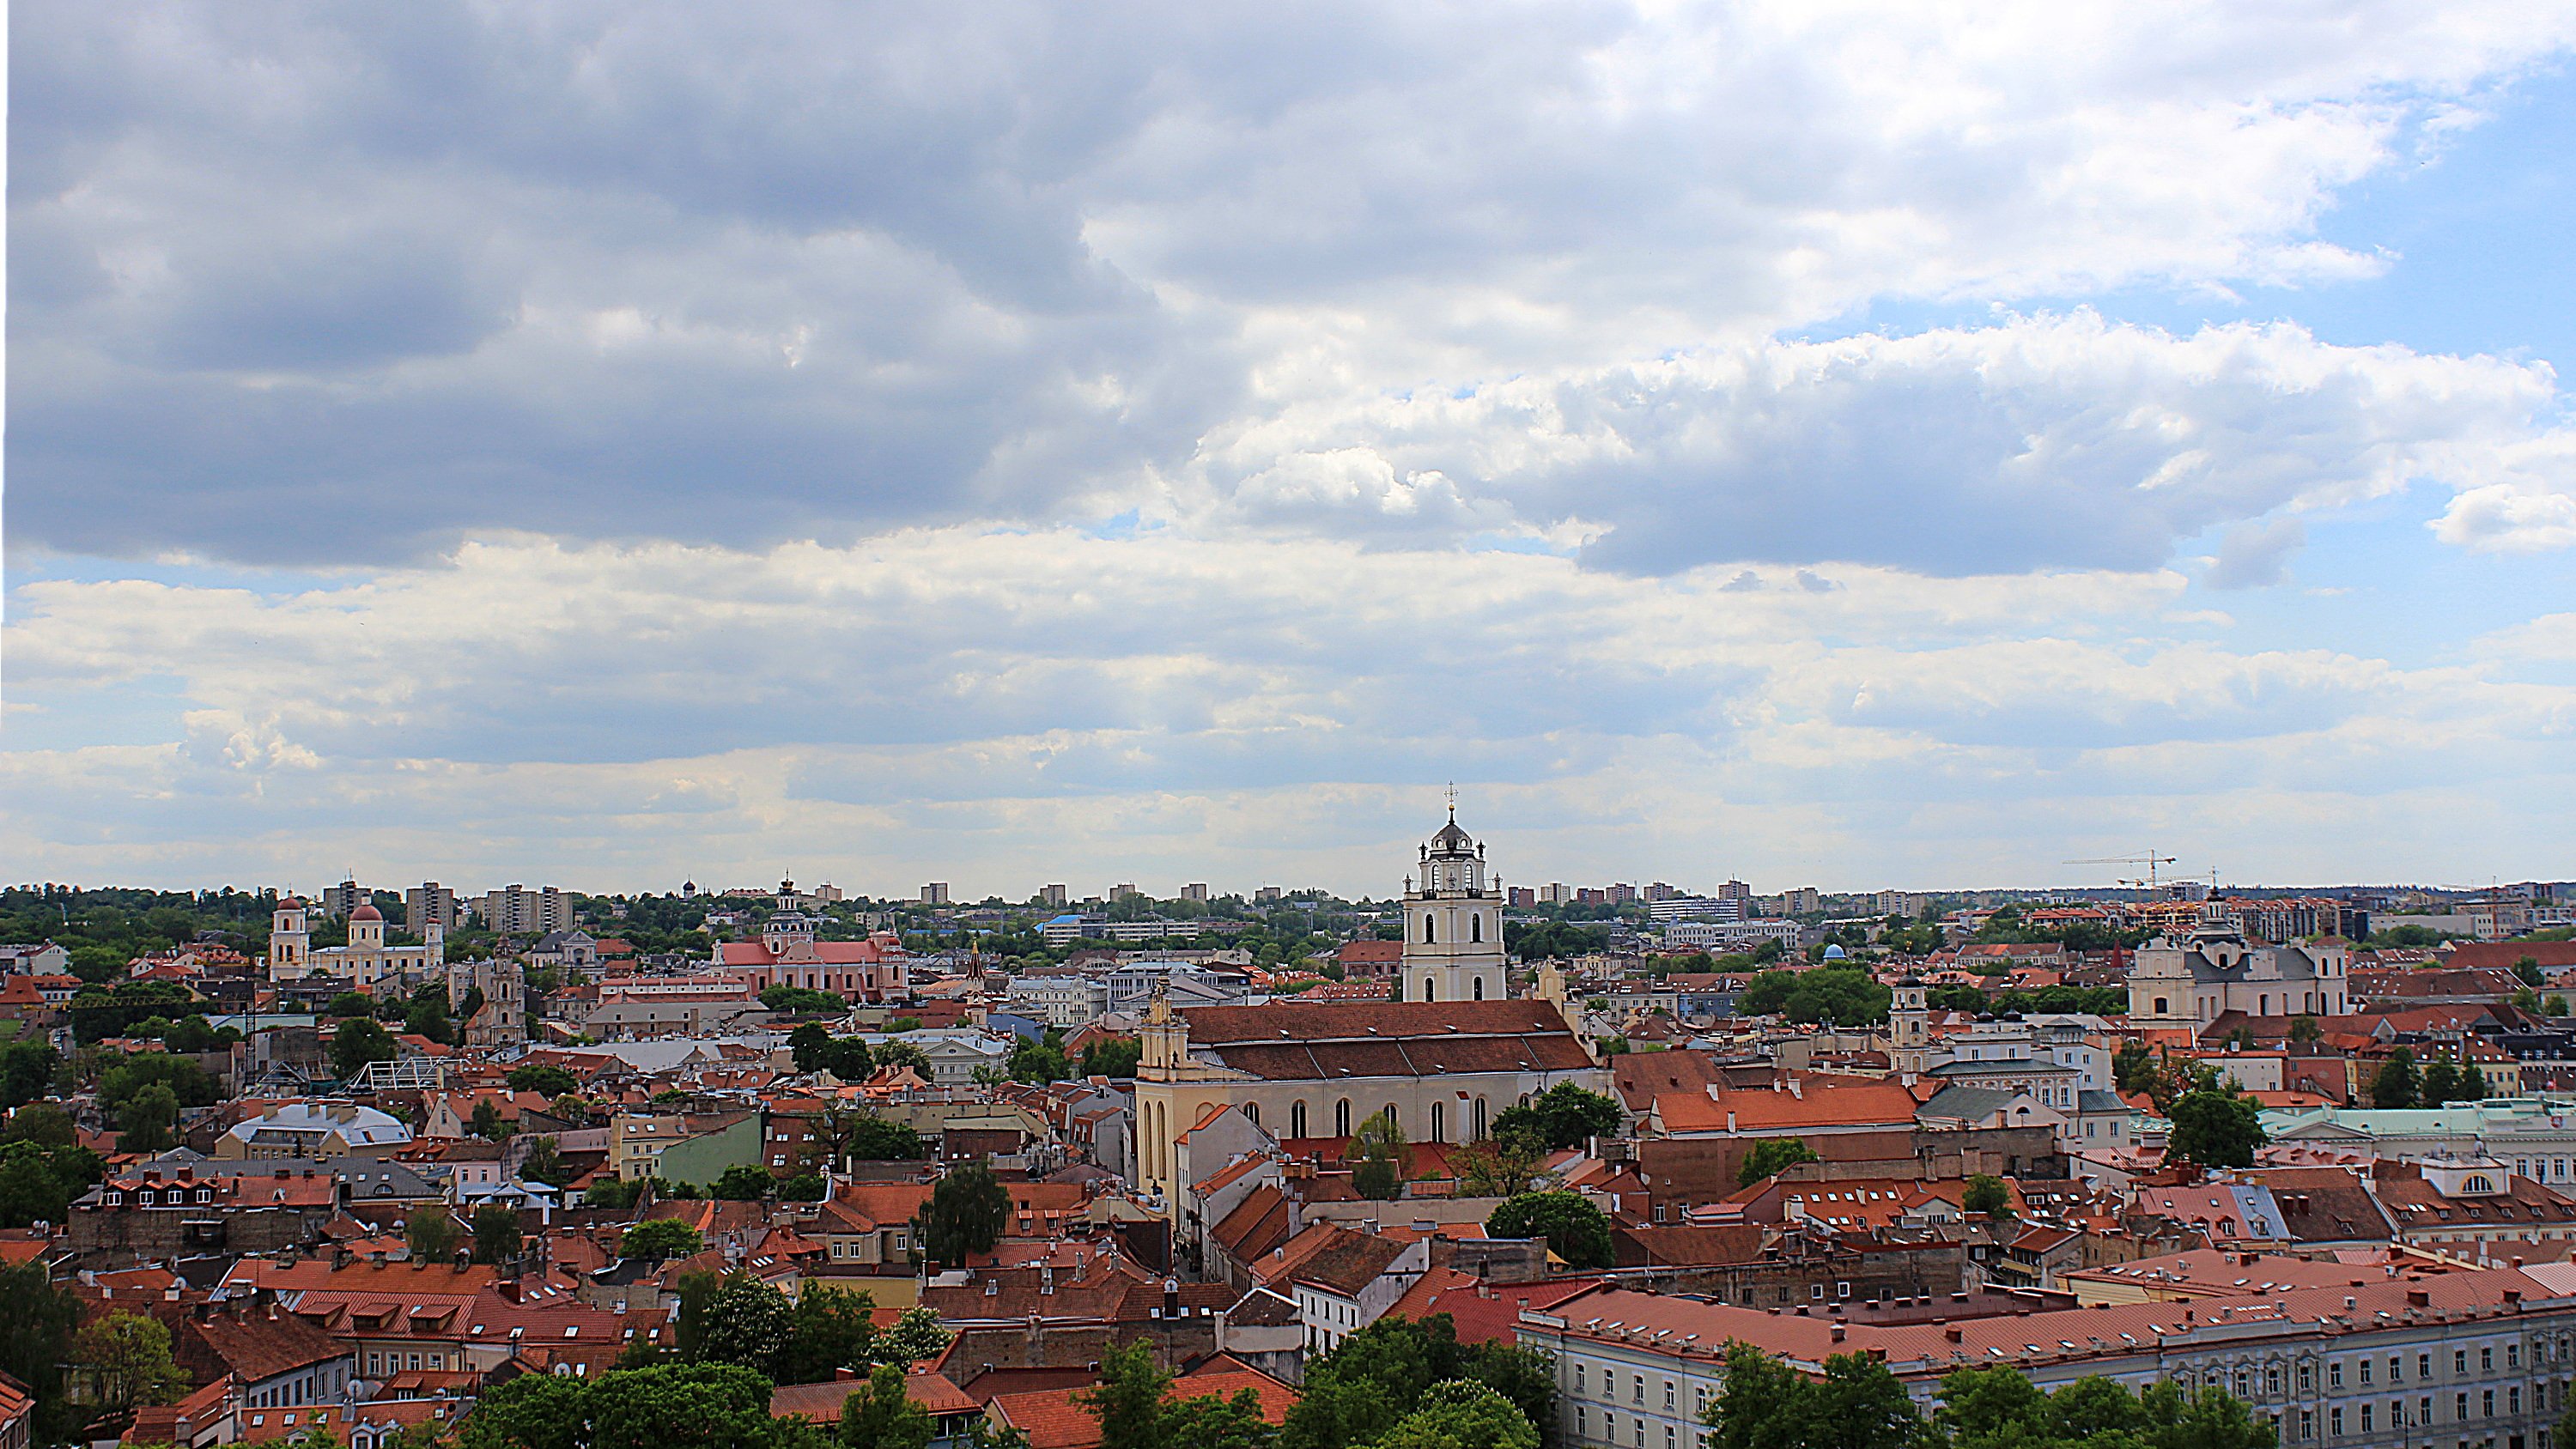 The view from Gediminas Hill to the Old Town of Vilnius. Plenty of old red rooftops.